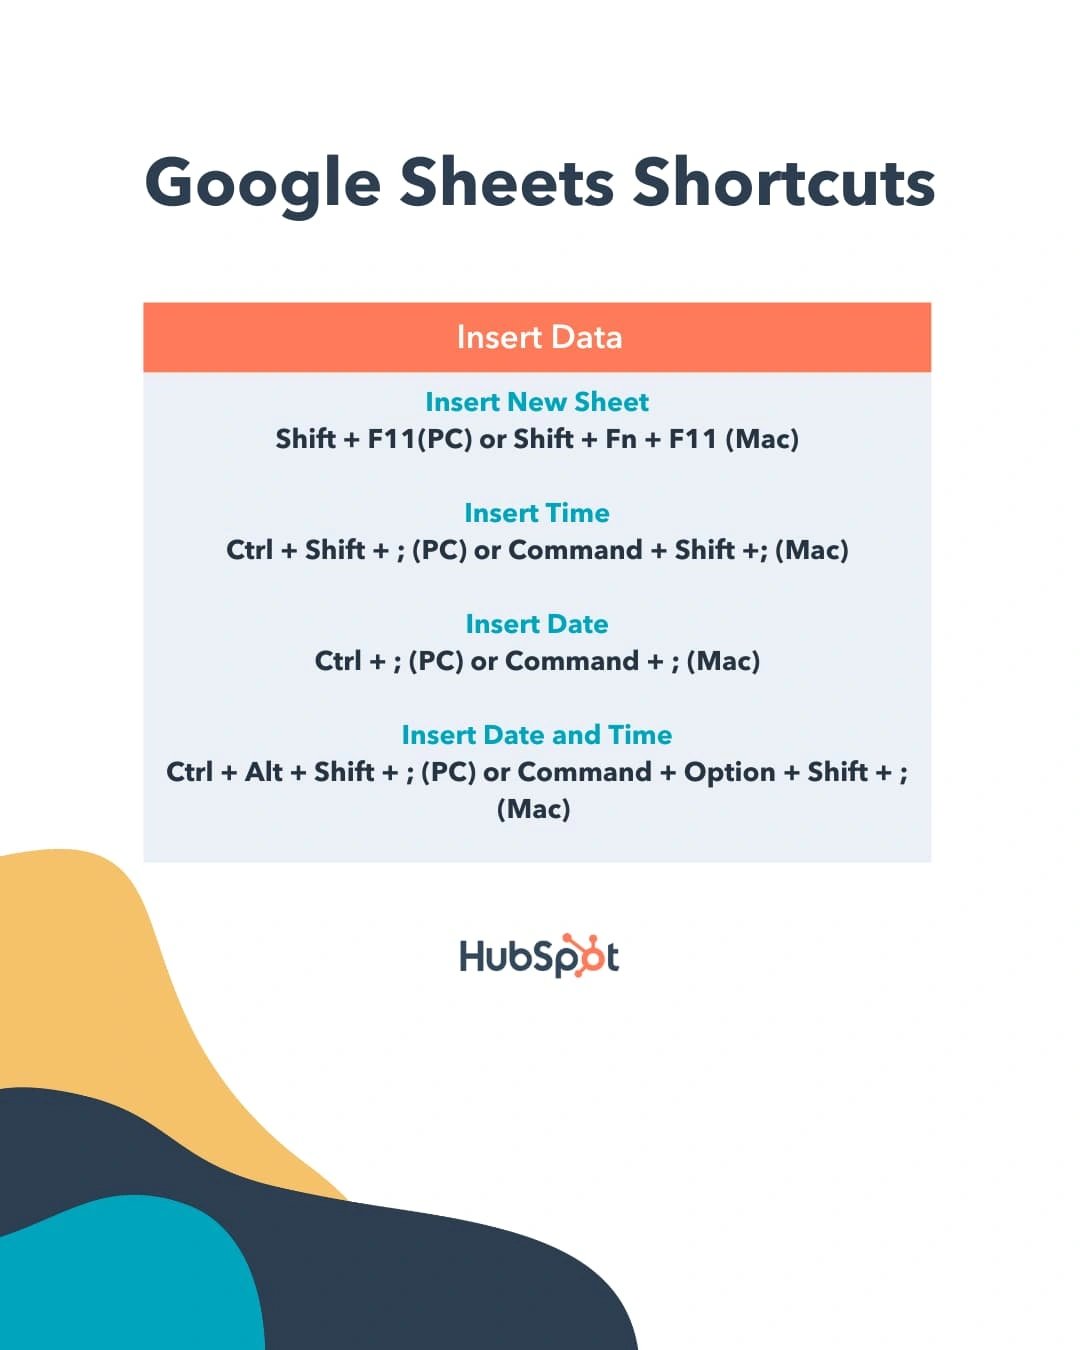 Using Google Sheets shortcuts to insert new sheet, insert time, insert date, and insert date and time 